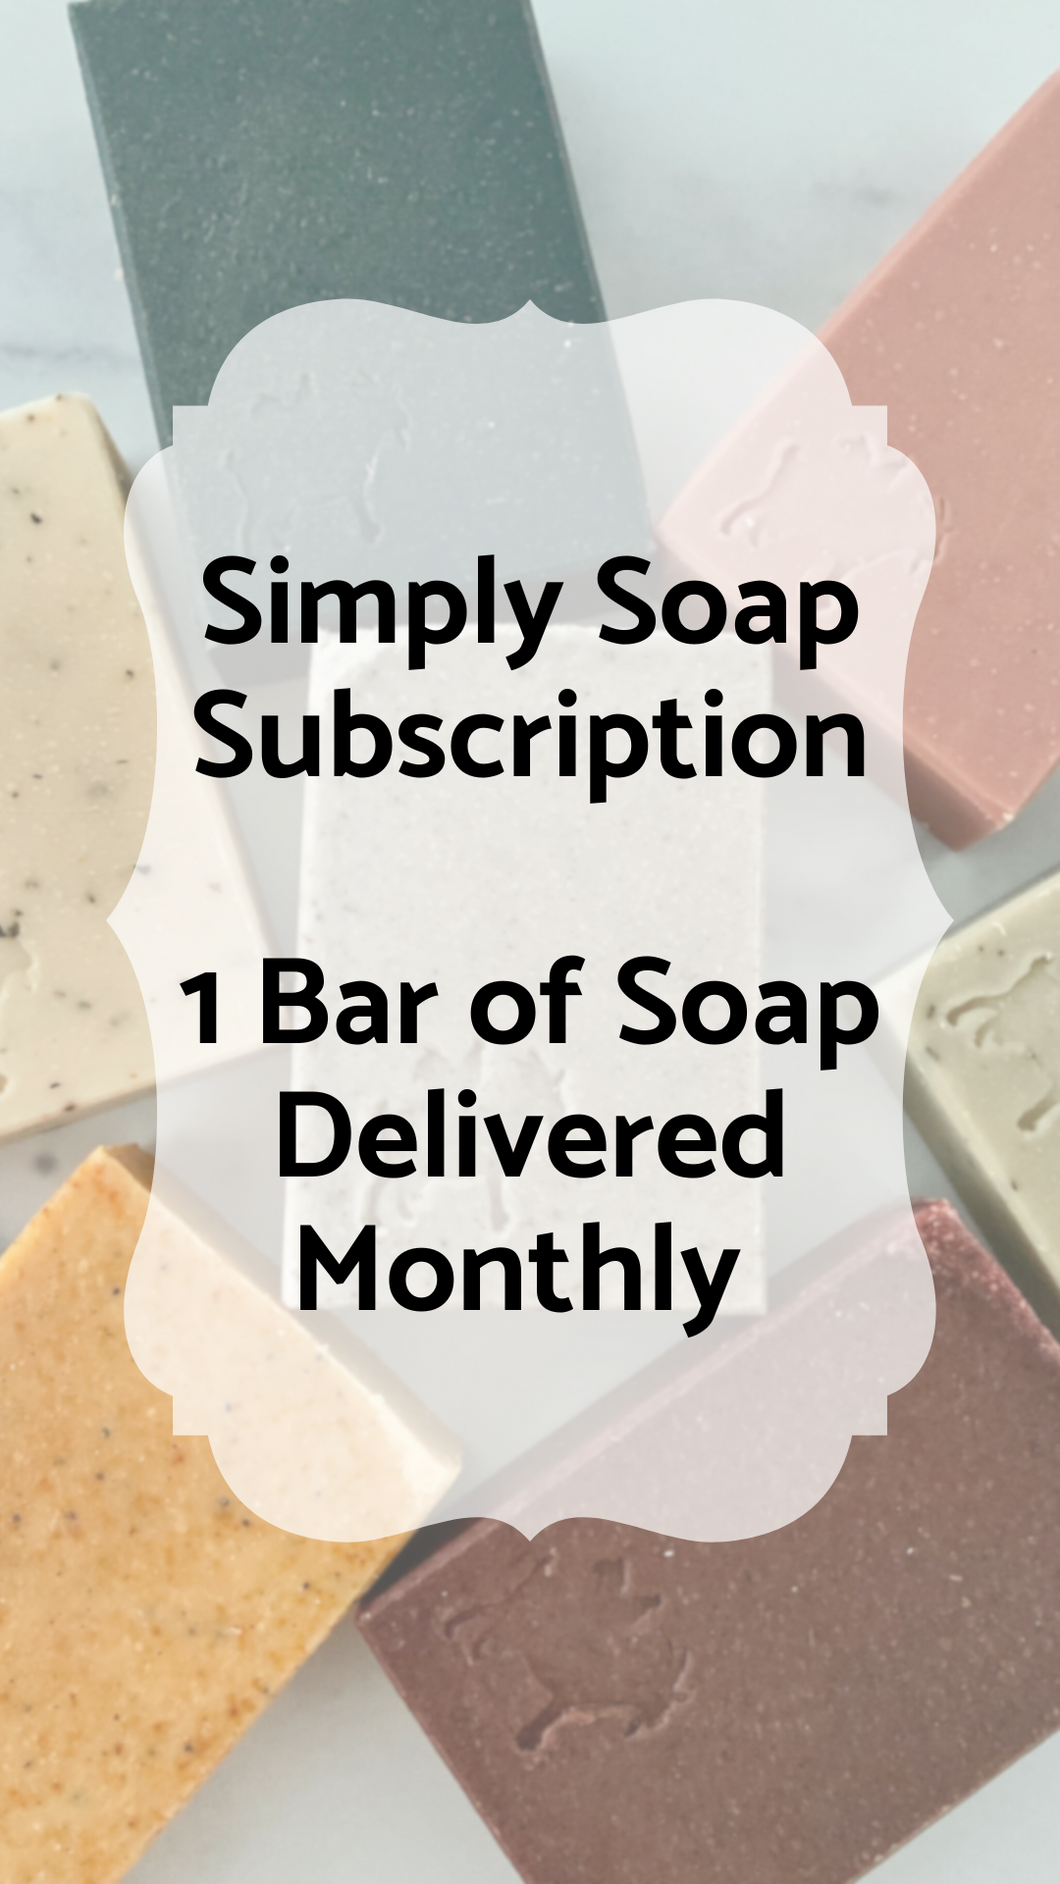 Simply Soap Subscription - 1 Bar of Soap Delivered Monthly